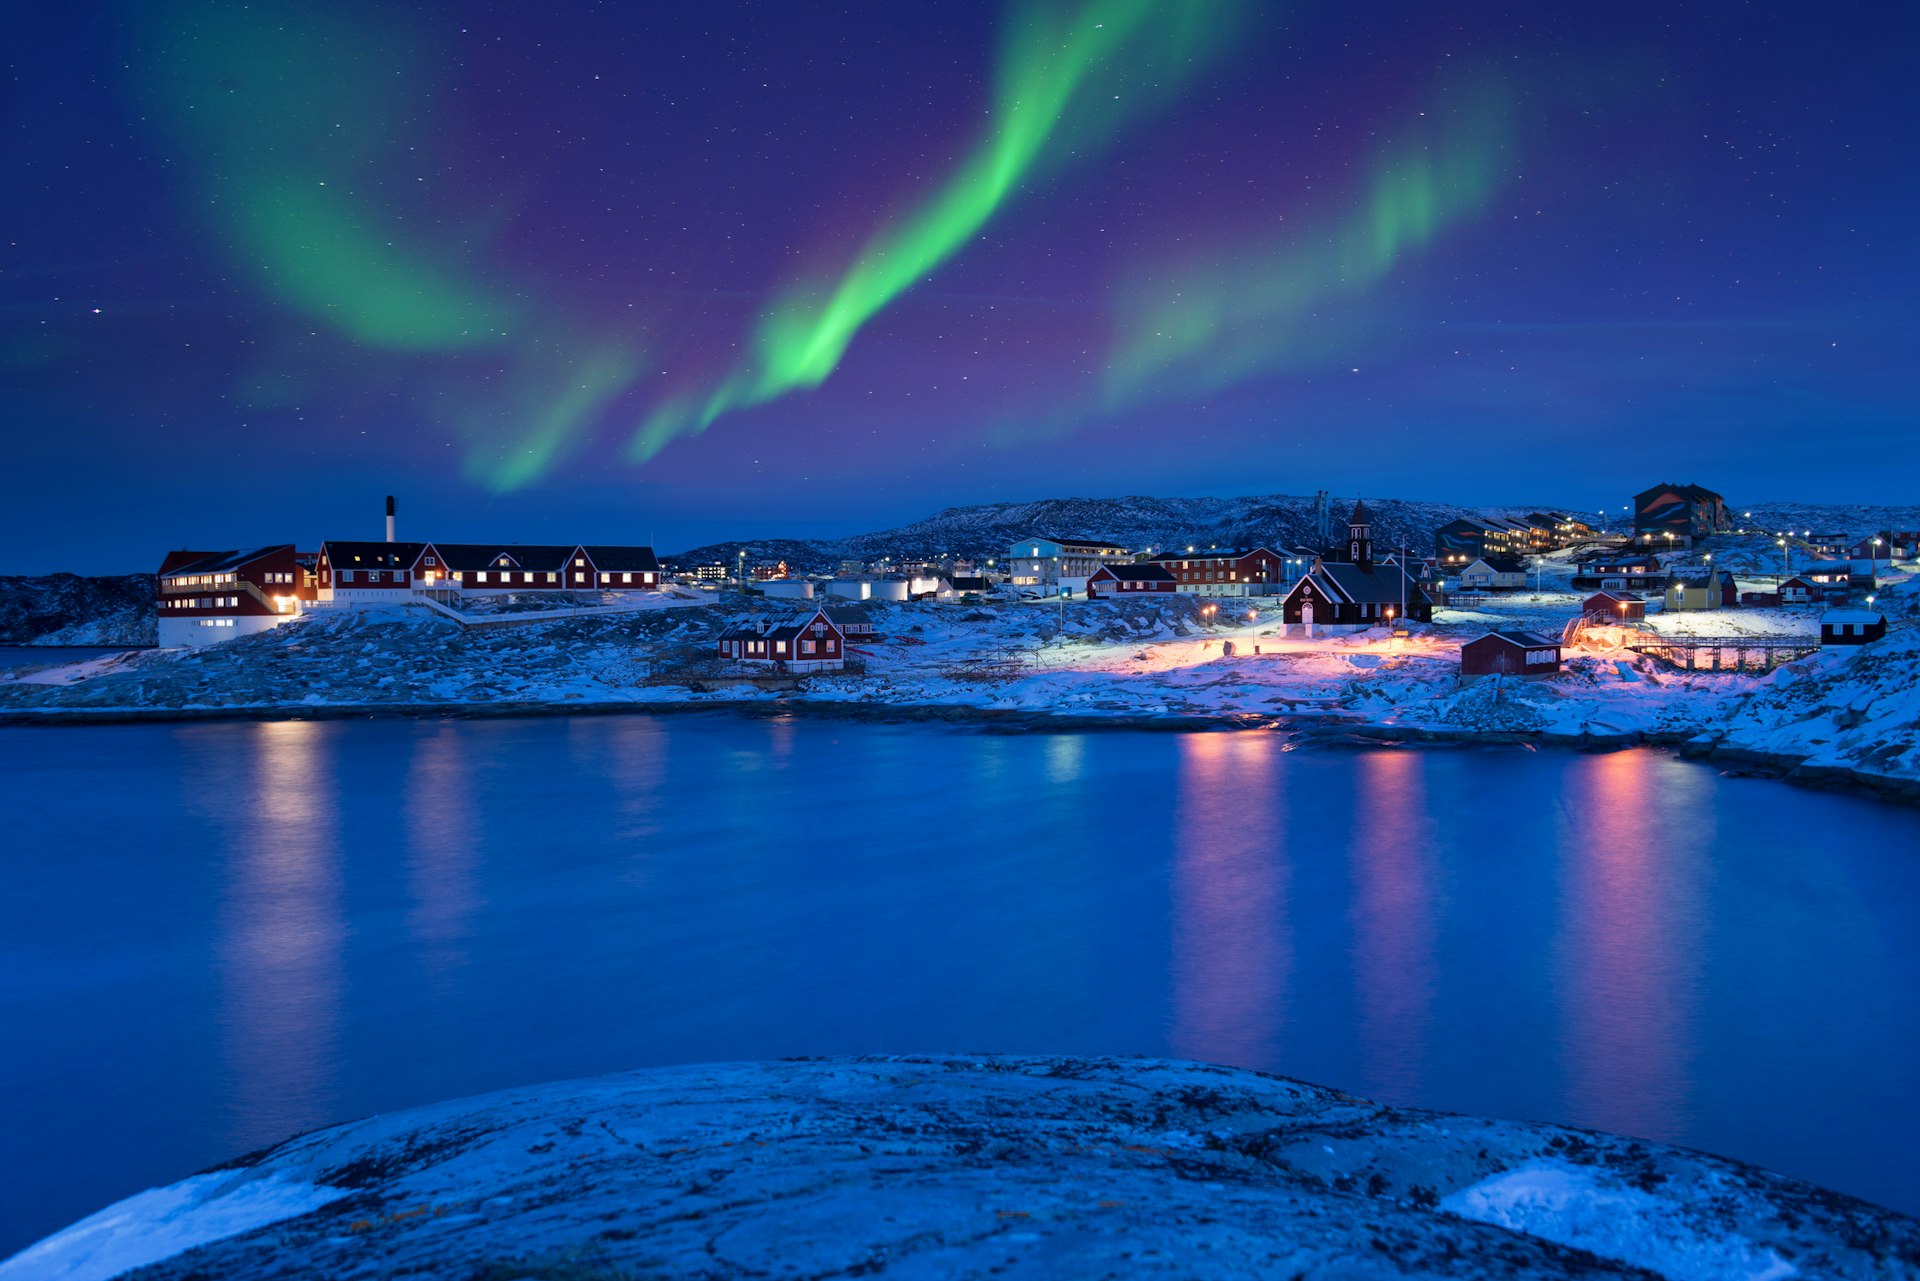 A view across a river to the town of Ilulissat, Greenland showing the Aurora illuminating the sky green